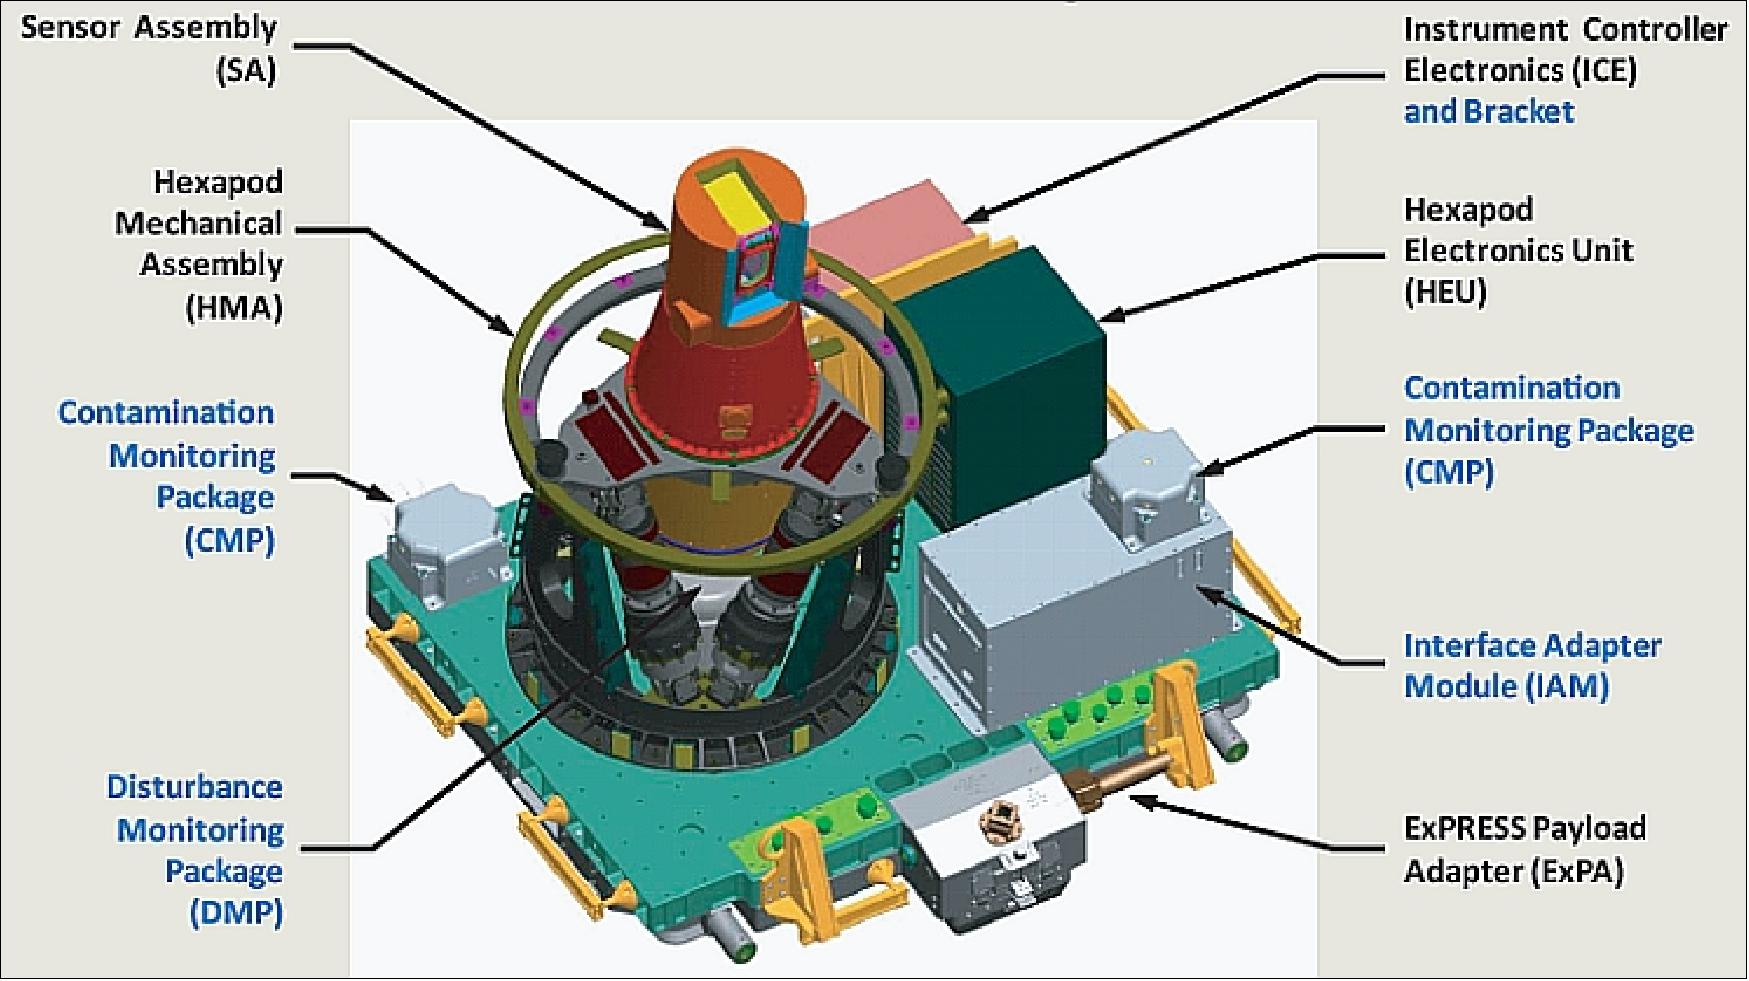 Figure 18: Illustration of the SAGE-III instrument and its external elements/subsystems - the instrument changes are highlighted in blue (image credit: NASA/LaRC, Ref. NO TAG#